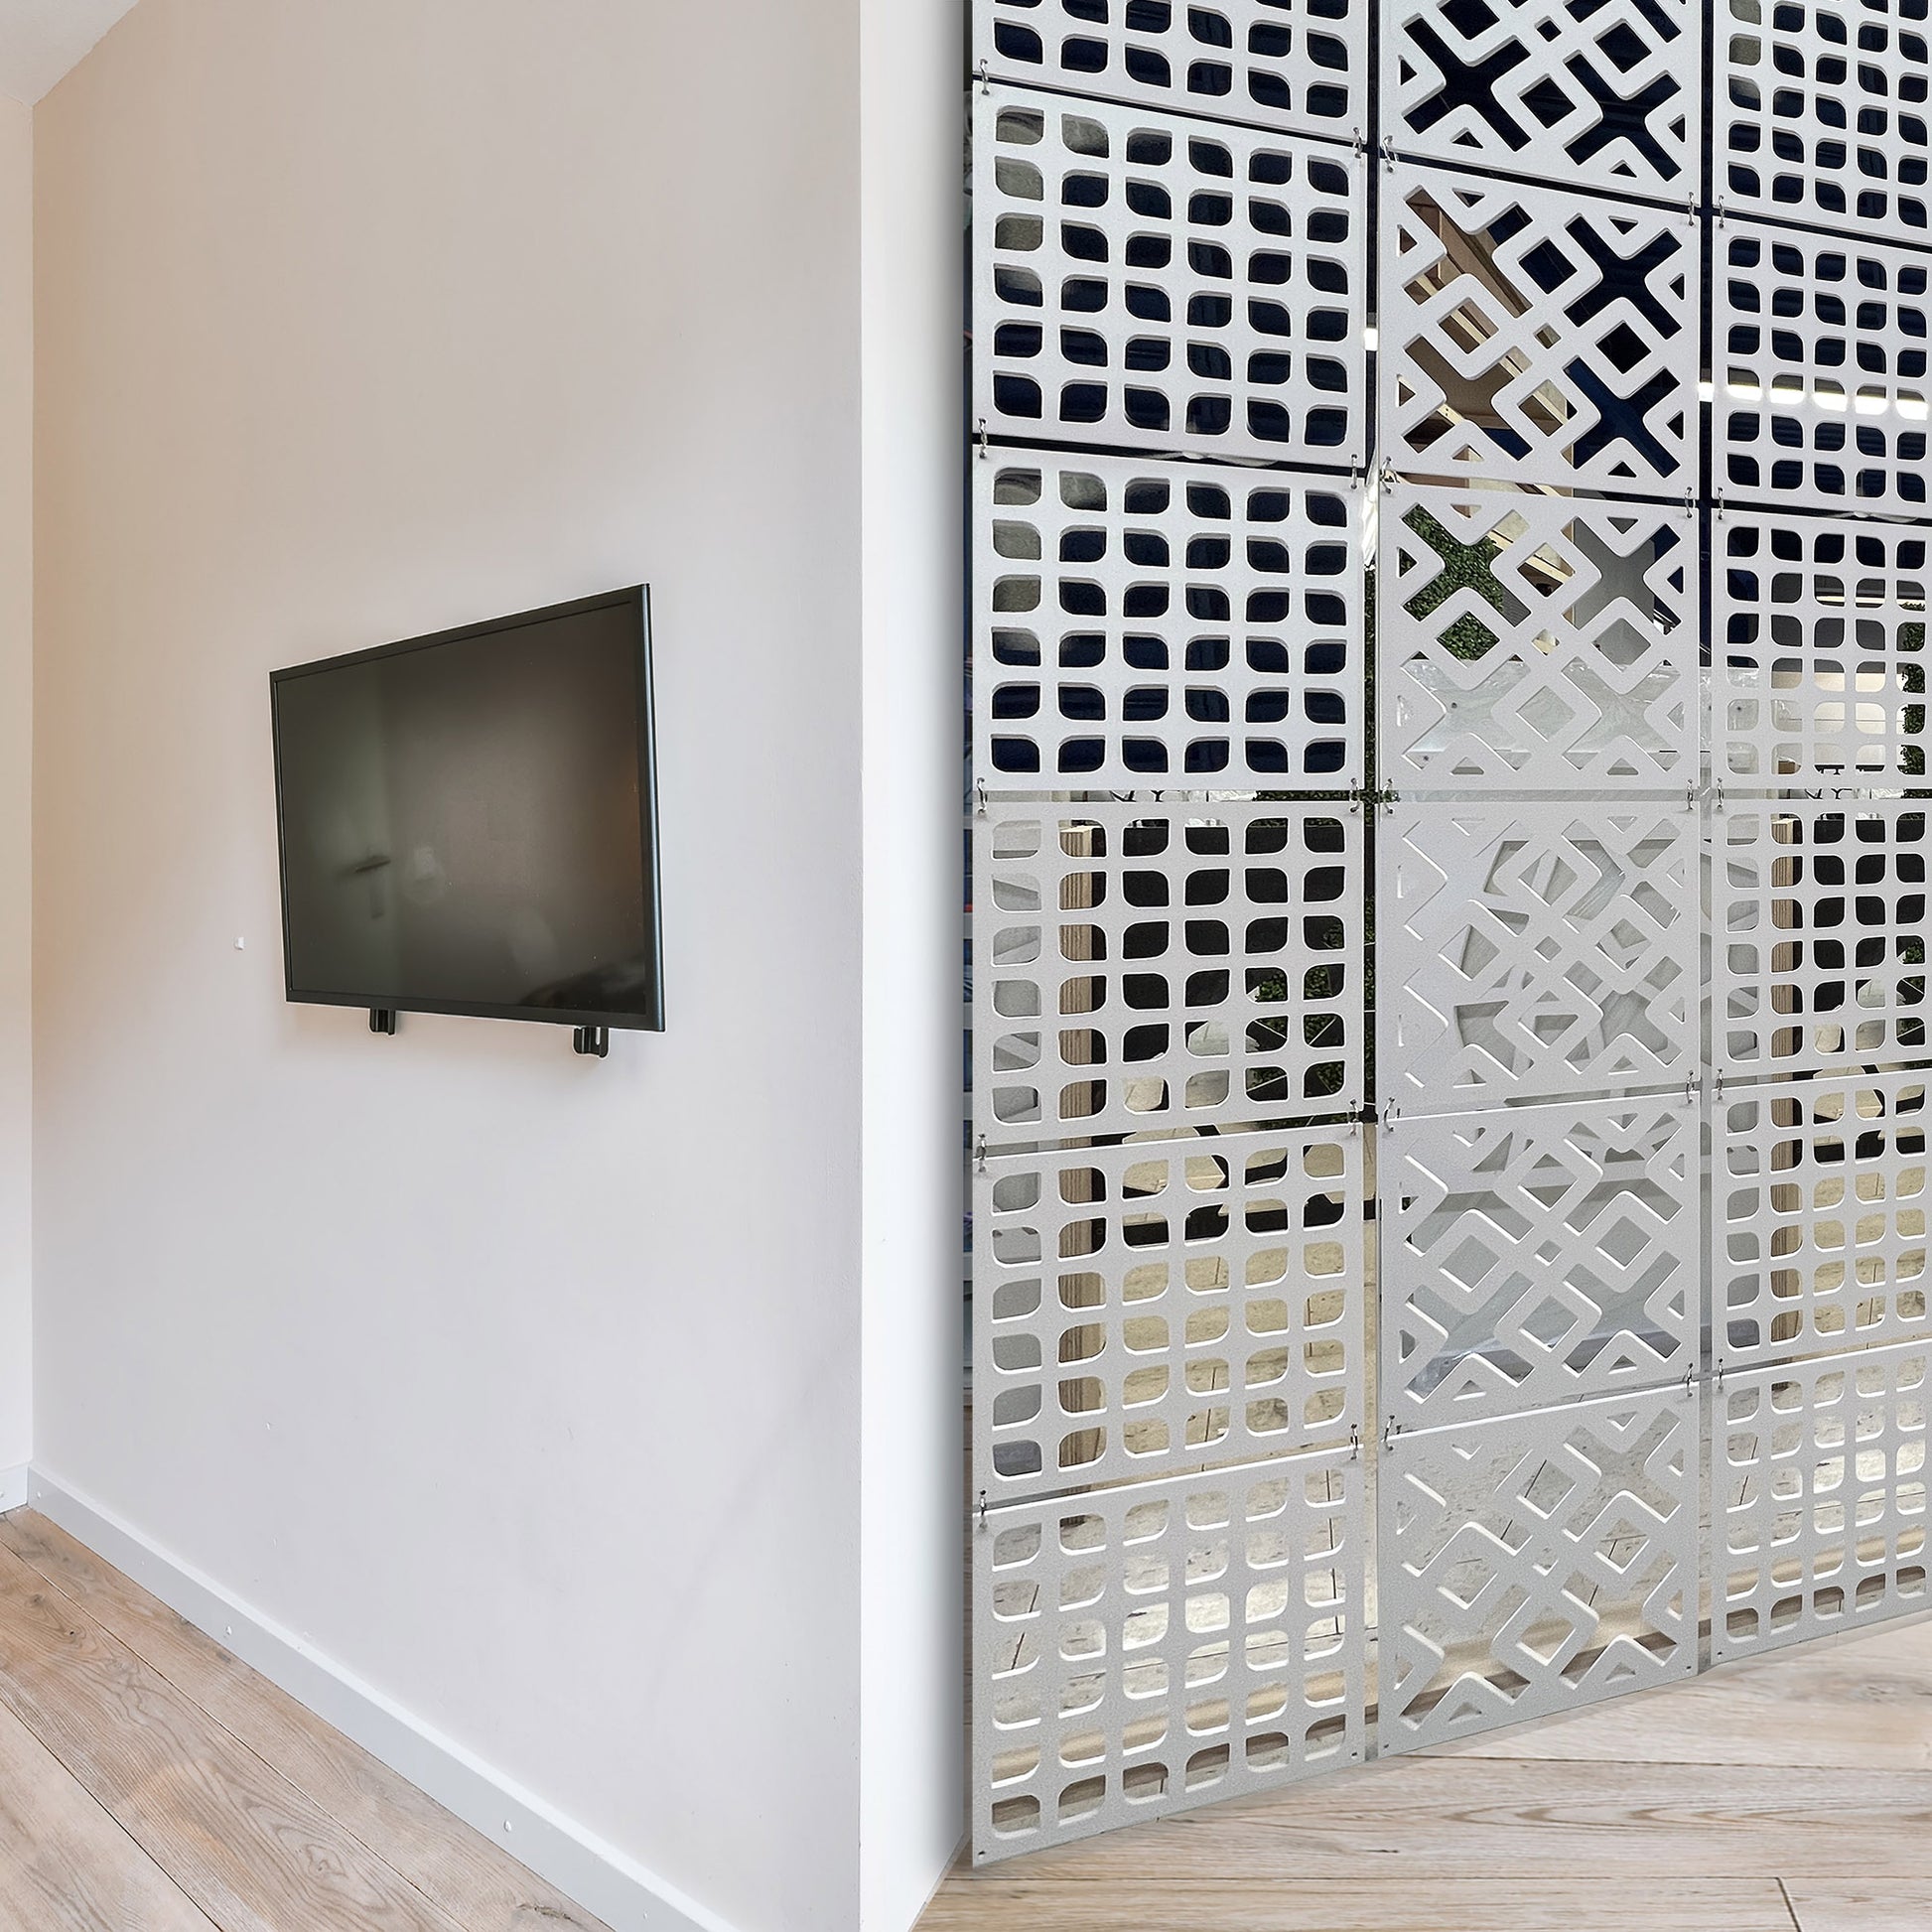 Hanging Room Divider, Wall Cover, Privacy Screens, dividers, hanging room dividers canada